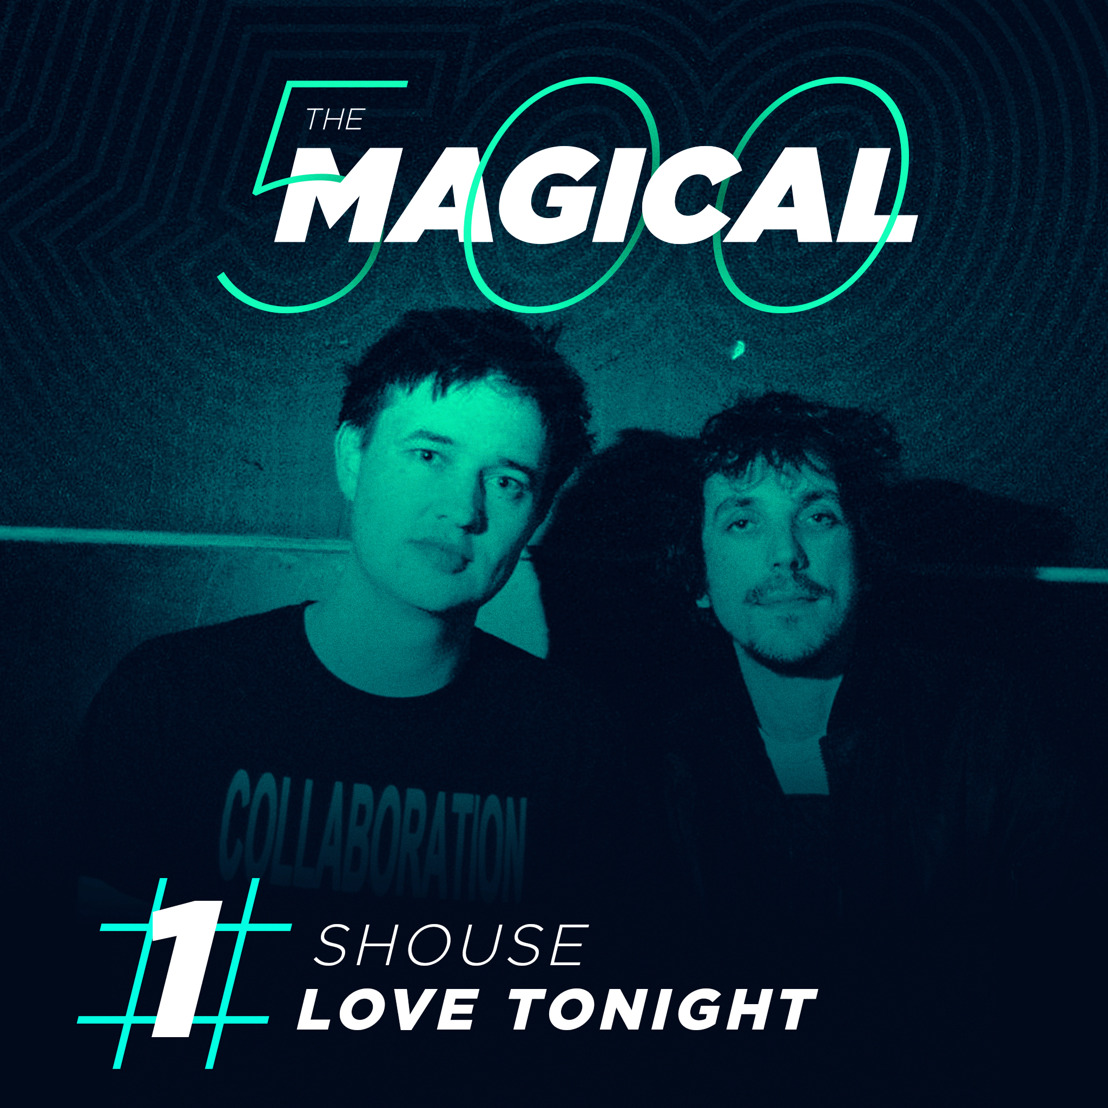 ‘Love Tonight’ becomes the number 1 in The Magical 500